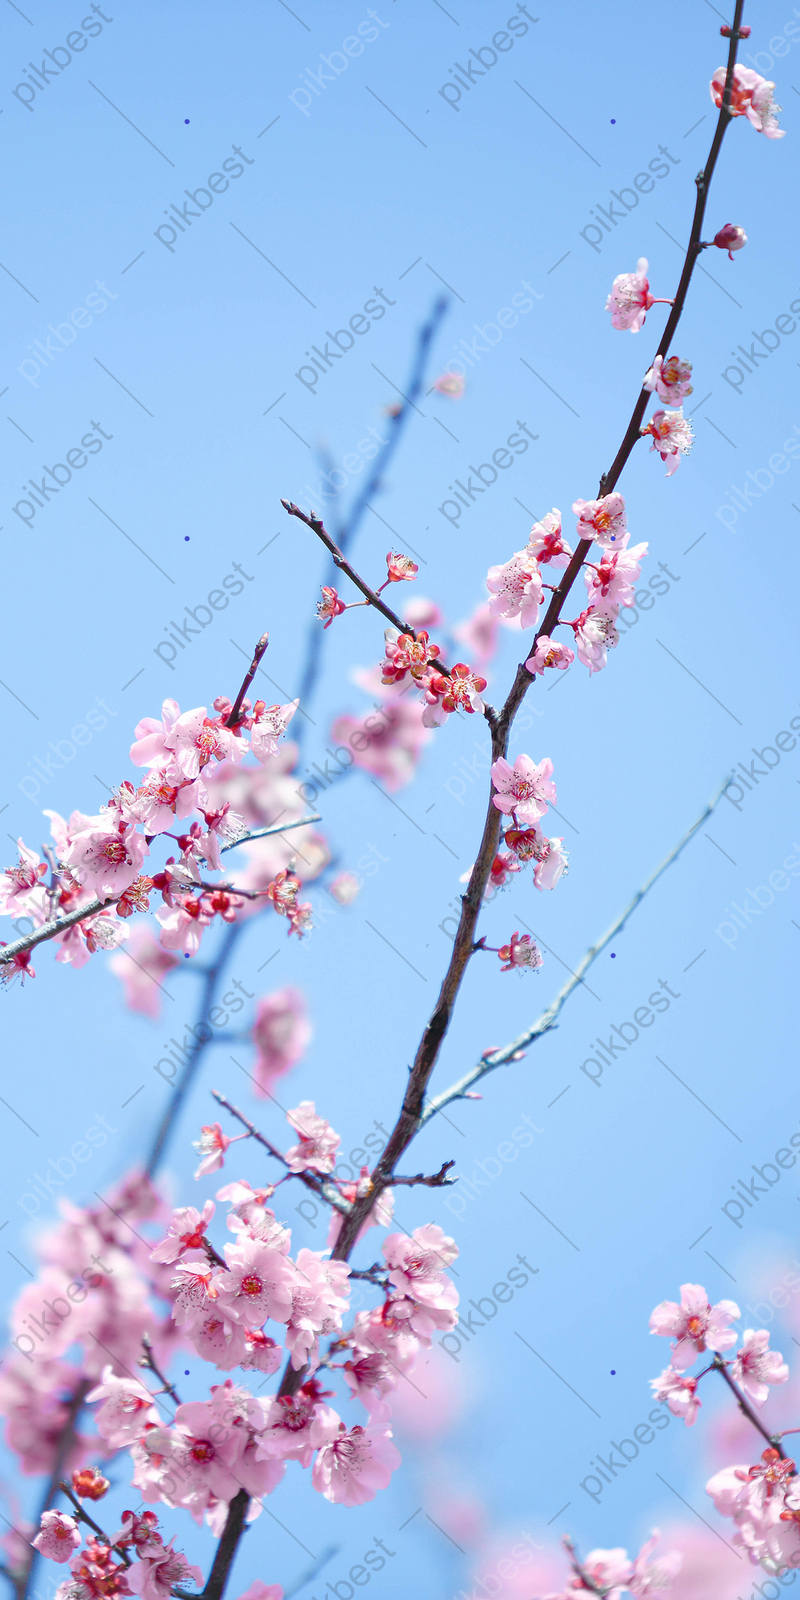 Spring cherry blossom sakura vertical version of photography picture romance phone wallpaper backgrounds psd free download